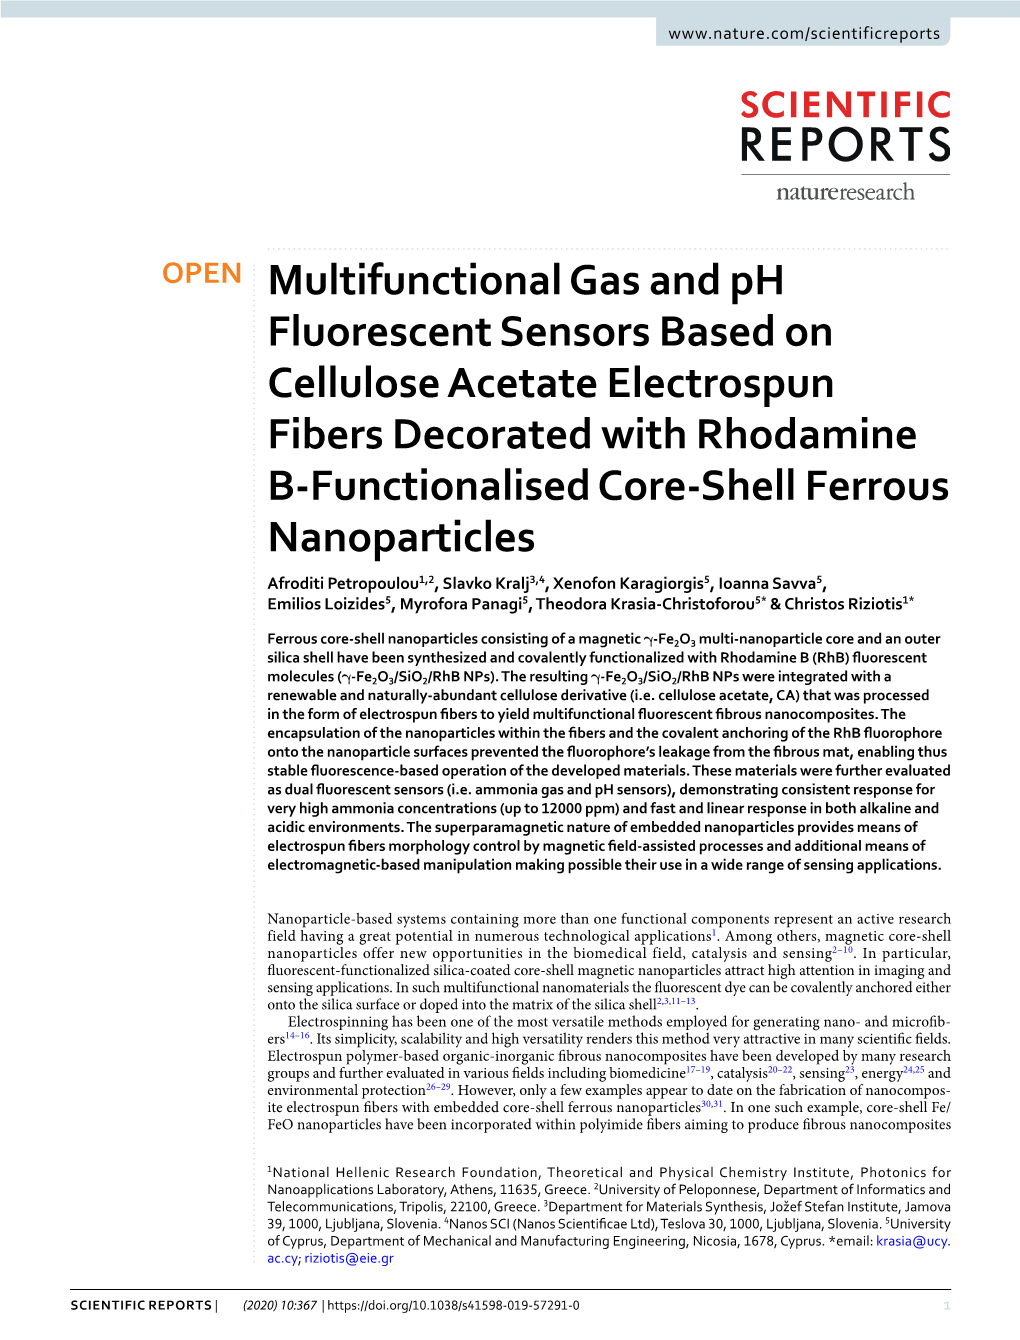 Multifunctional Gas and Ph Fluorescent Sensors Based On